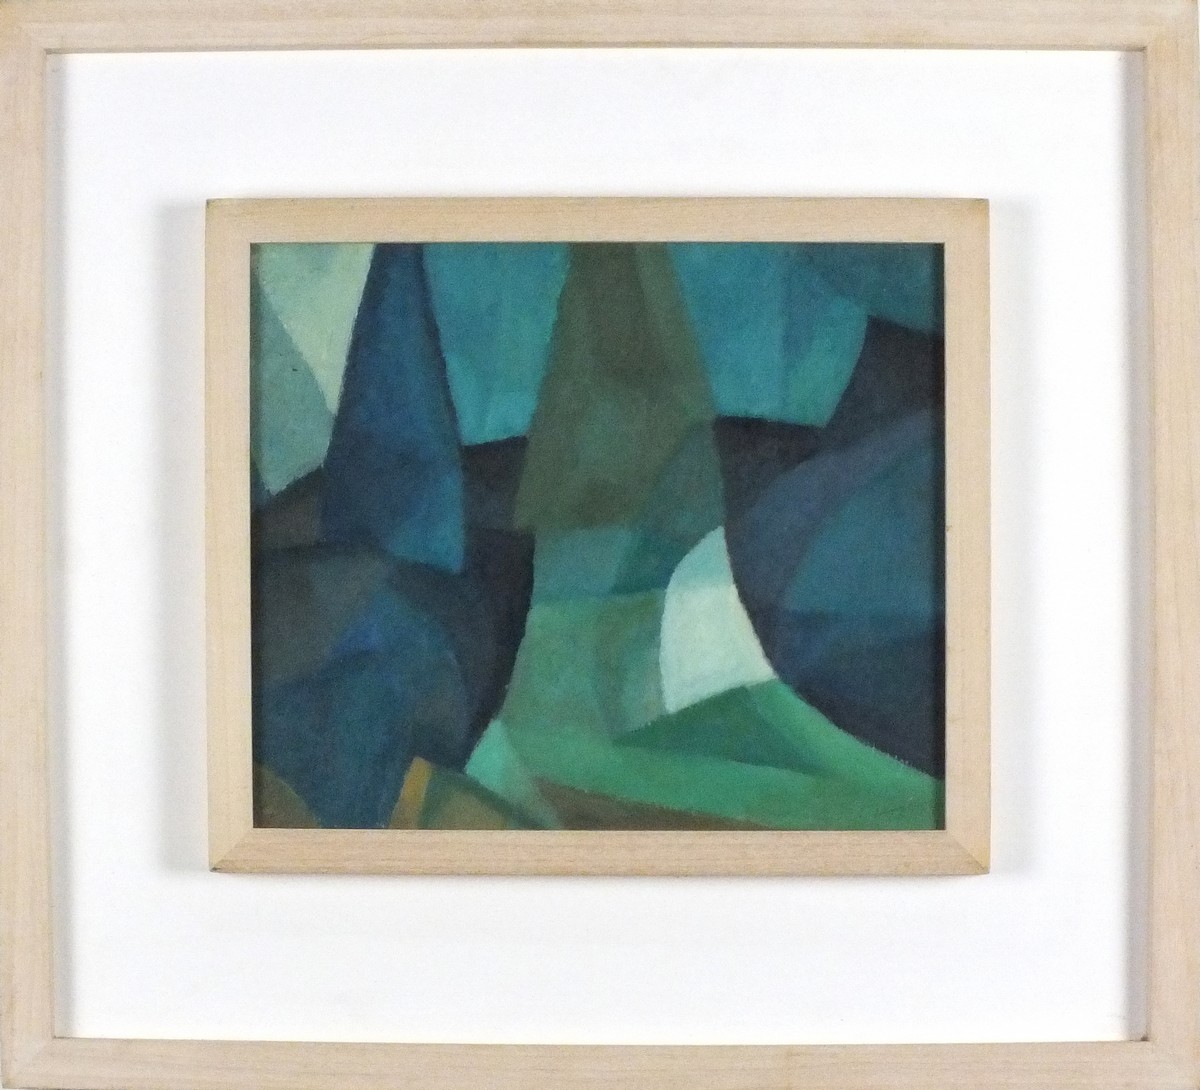 Horas KENNEDY (British 1917-1997) Blue Abstract, Oil on board, Signed with initials lower right, - Image 2 of 2